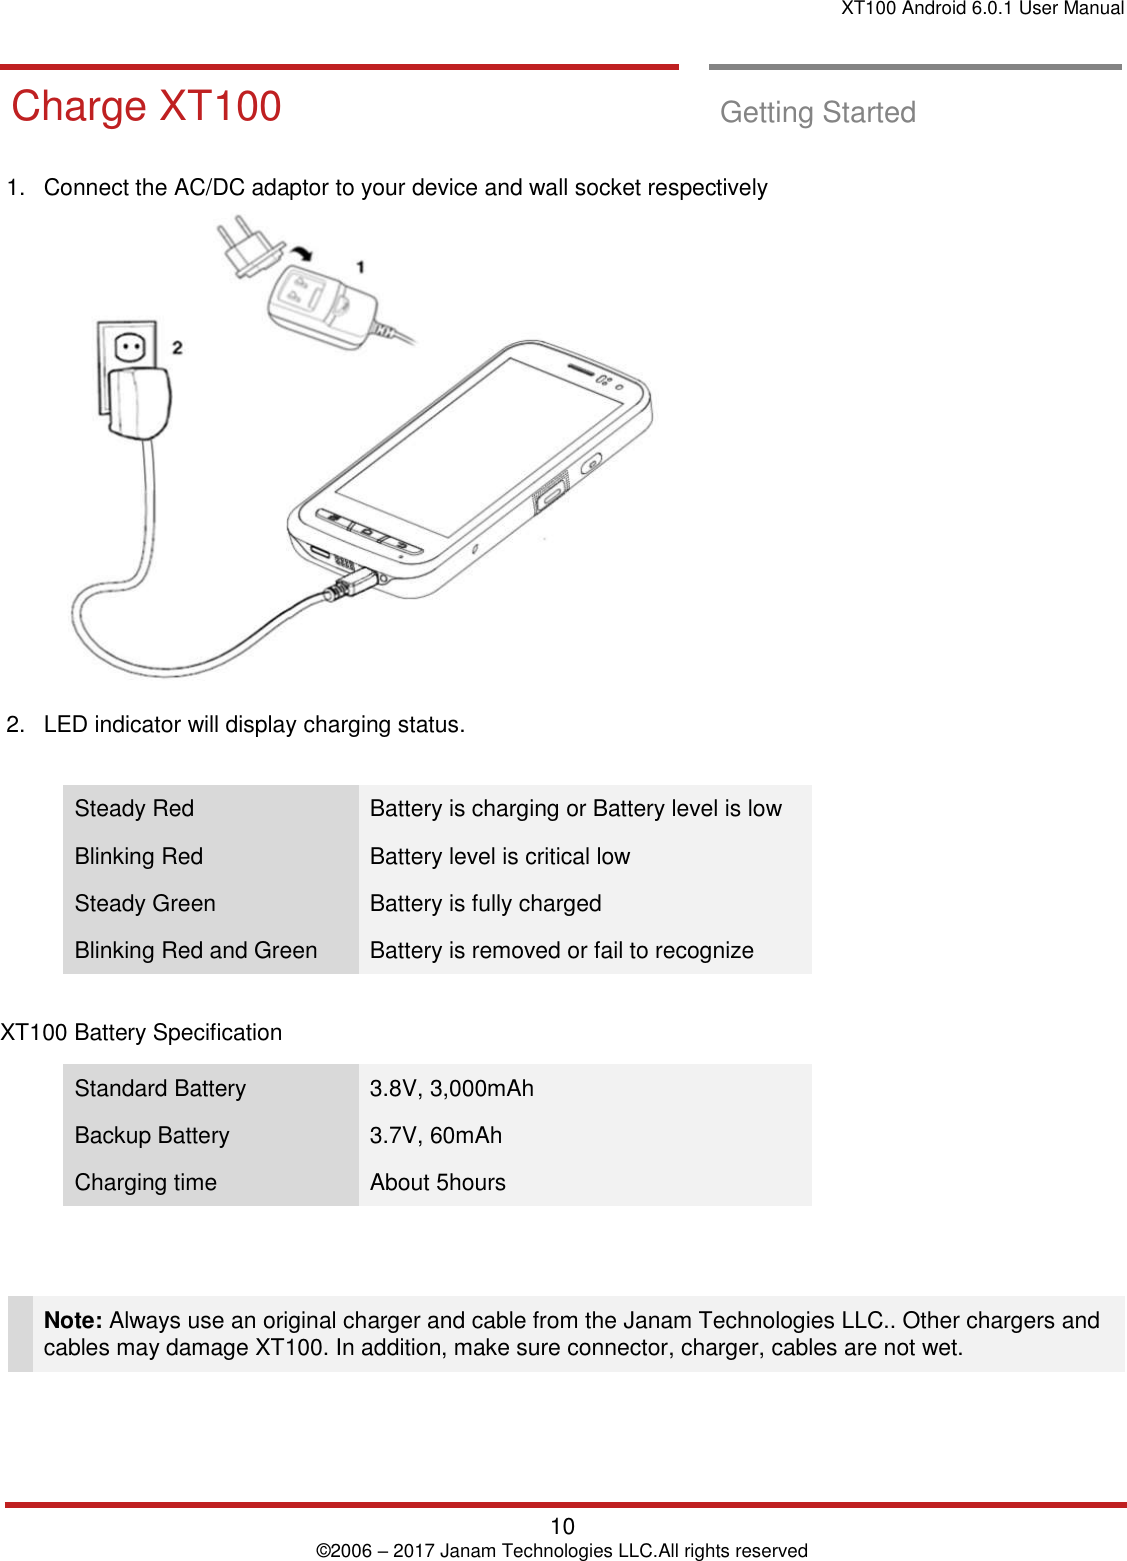 XT100 Android 6.0.1 User Manual   10 © 2006 – 2017 Janam Technologies LLC.All rights reserved  Getting Started       Charge XT100 Charge XT100  Getting Started  1.  Connect the AC/DC adaptor to your device and wall socket respectively    2.  LED indicator will display charging status.  Steady Red Battery is charging or Battery level is low Blinking Red Battery level is critical low Steady Green Battery is fully charged Blinking Red and Green Battery is removed or fail to recognize  XT100 Battery Specification  Standard Battery  3.8V, 3,000mAh Backup Battery  3.7V, 60mAh Charging time  About 5hours    Note: Always use an original charger and cable from the Janam Technologies LLC.. Other chargers and cables may damage XT100. In addition, make sure connector, charger, cables are not wet.      